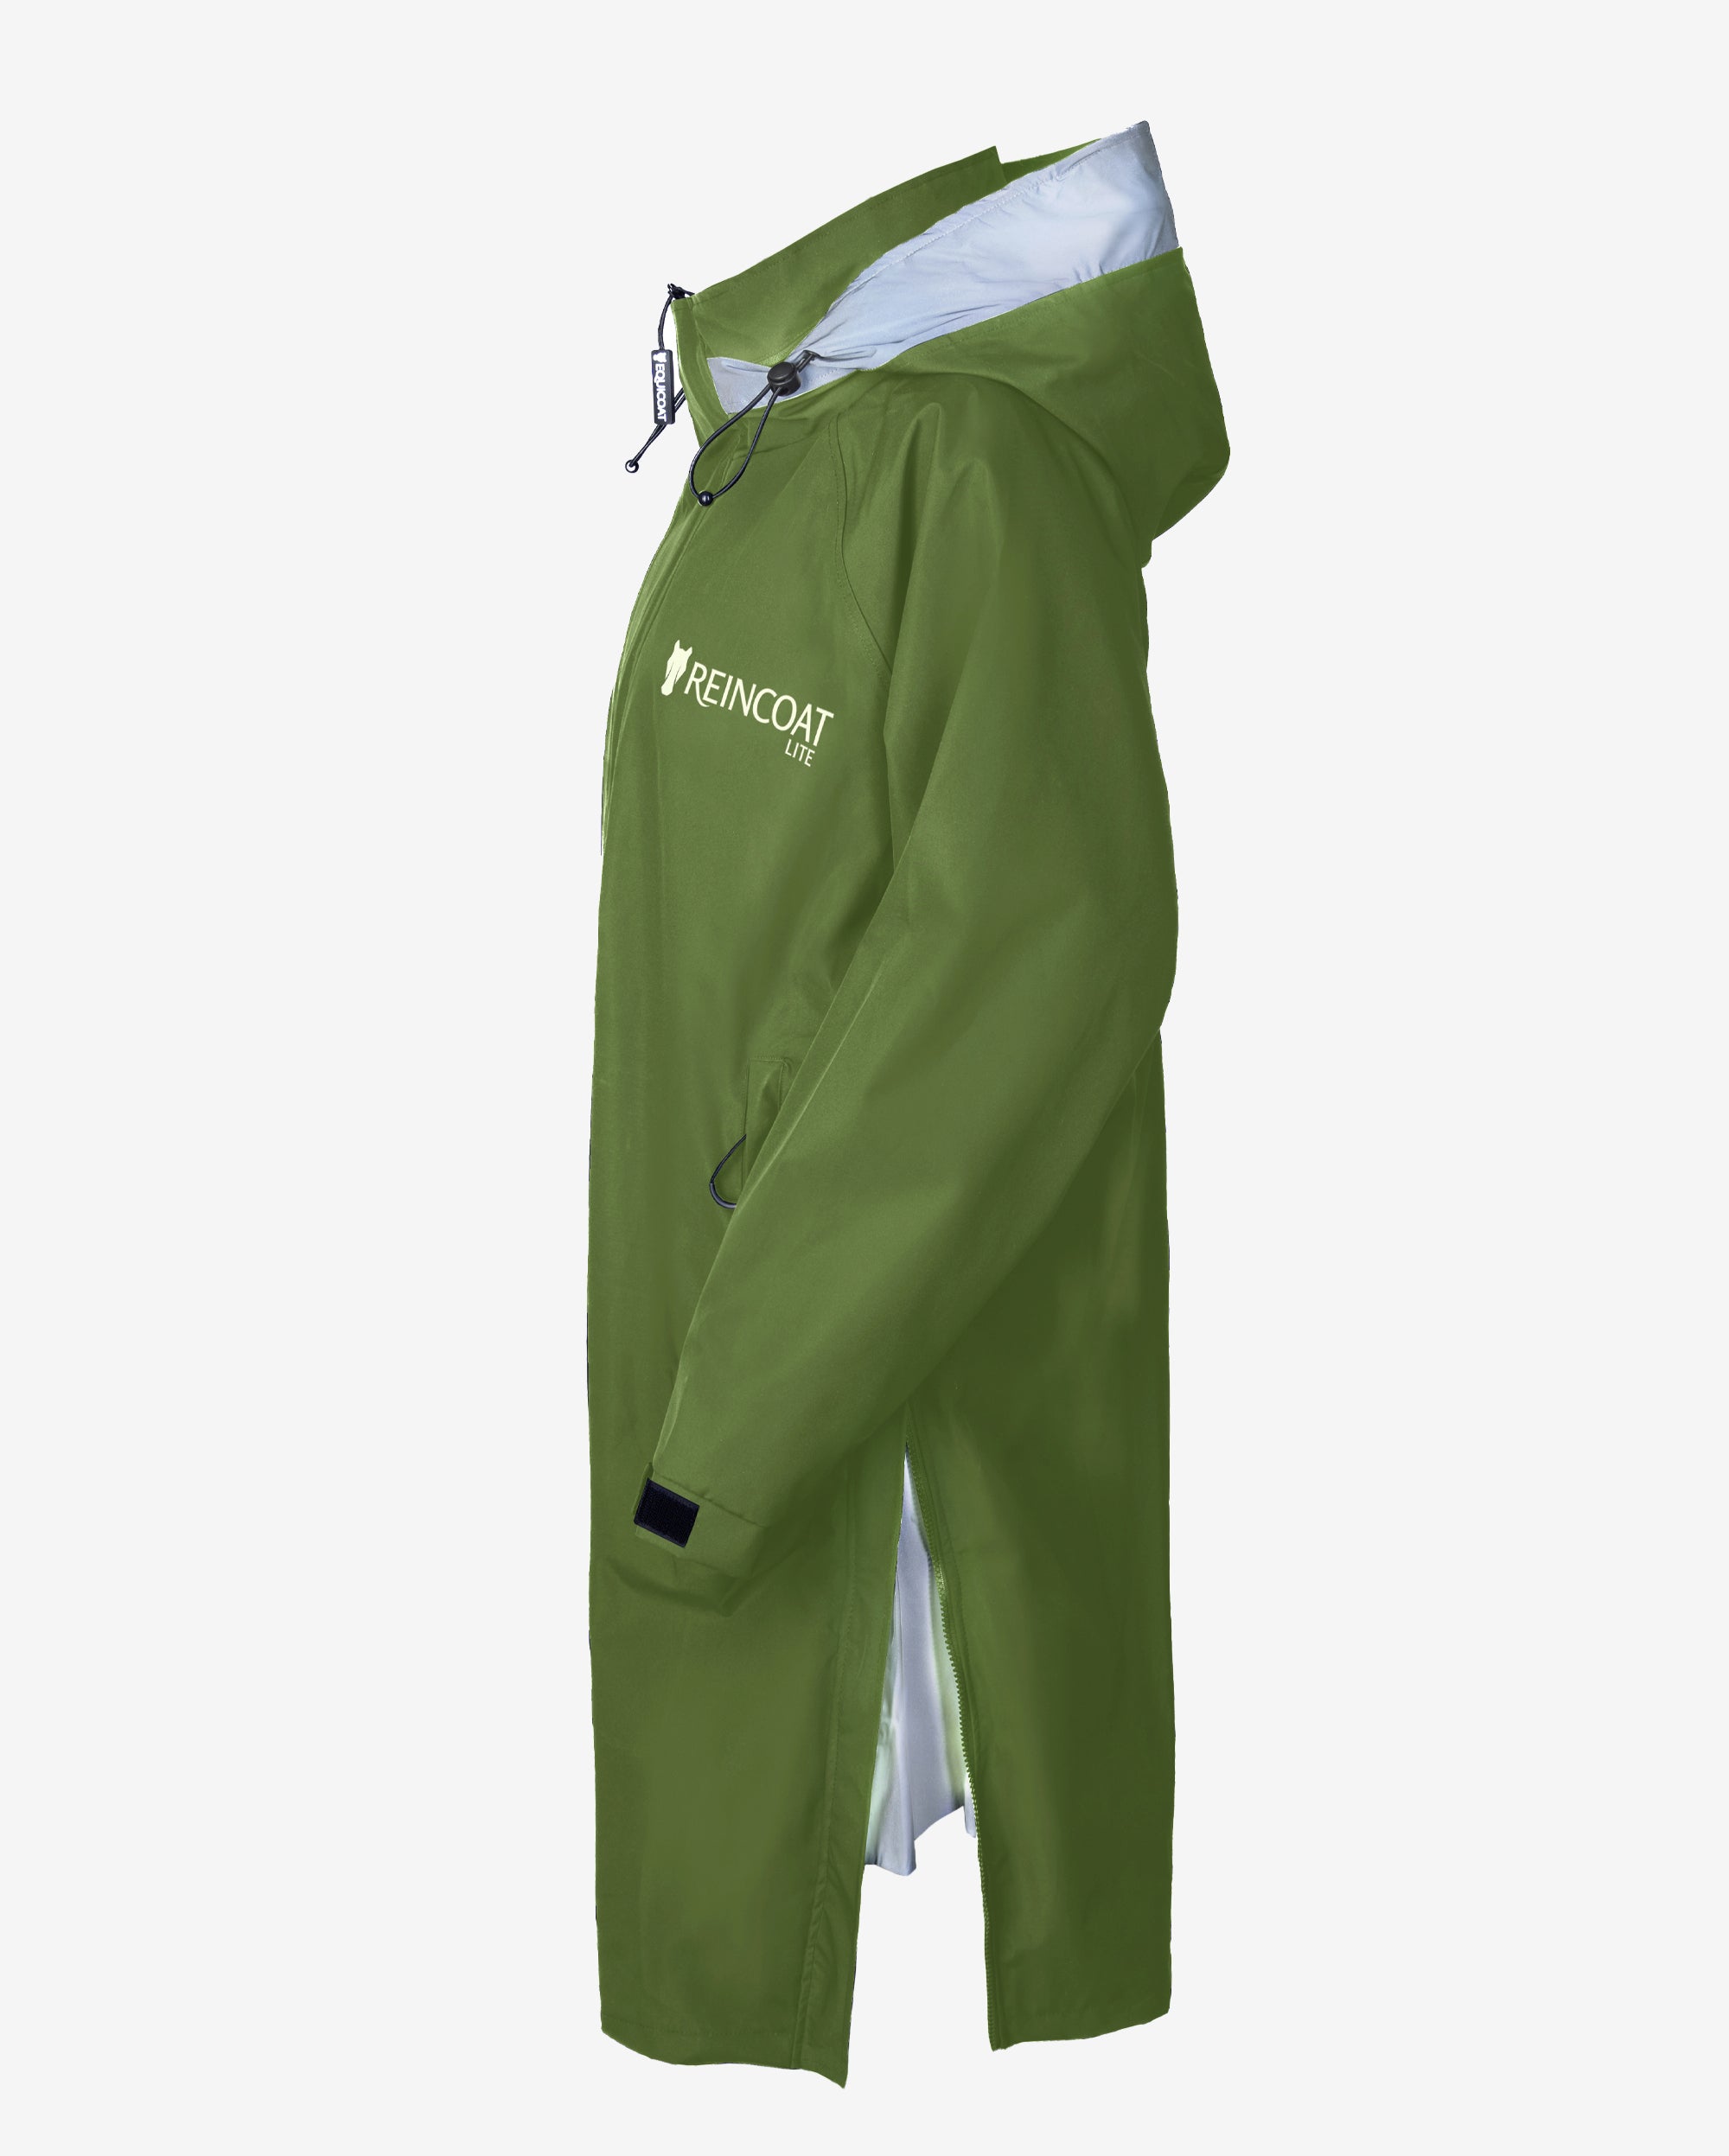 Reincoat Lite Adult - Forest Green